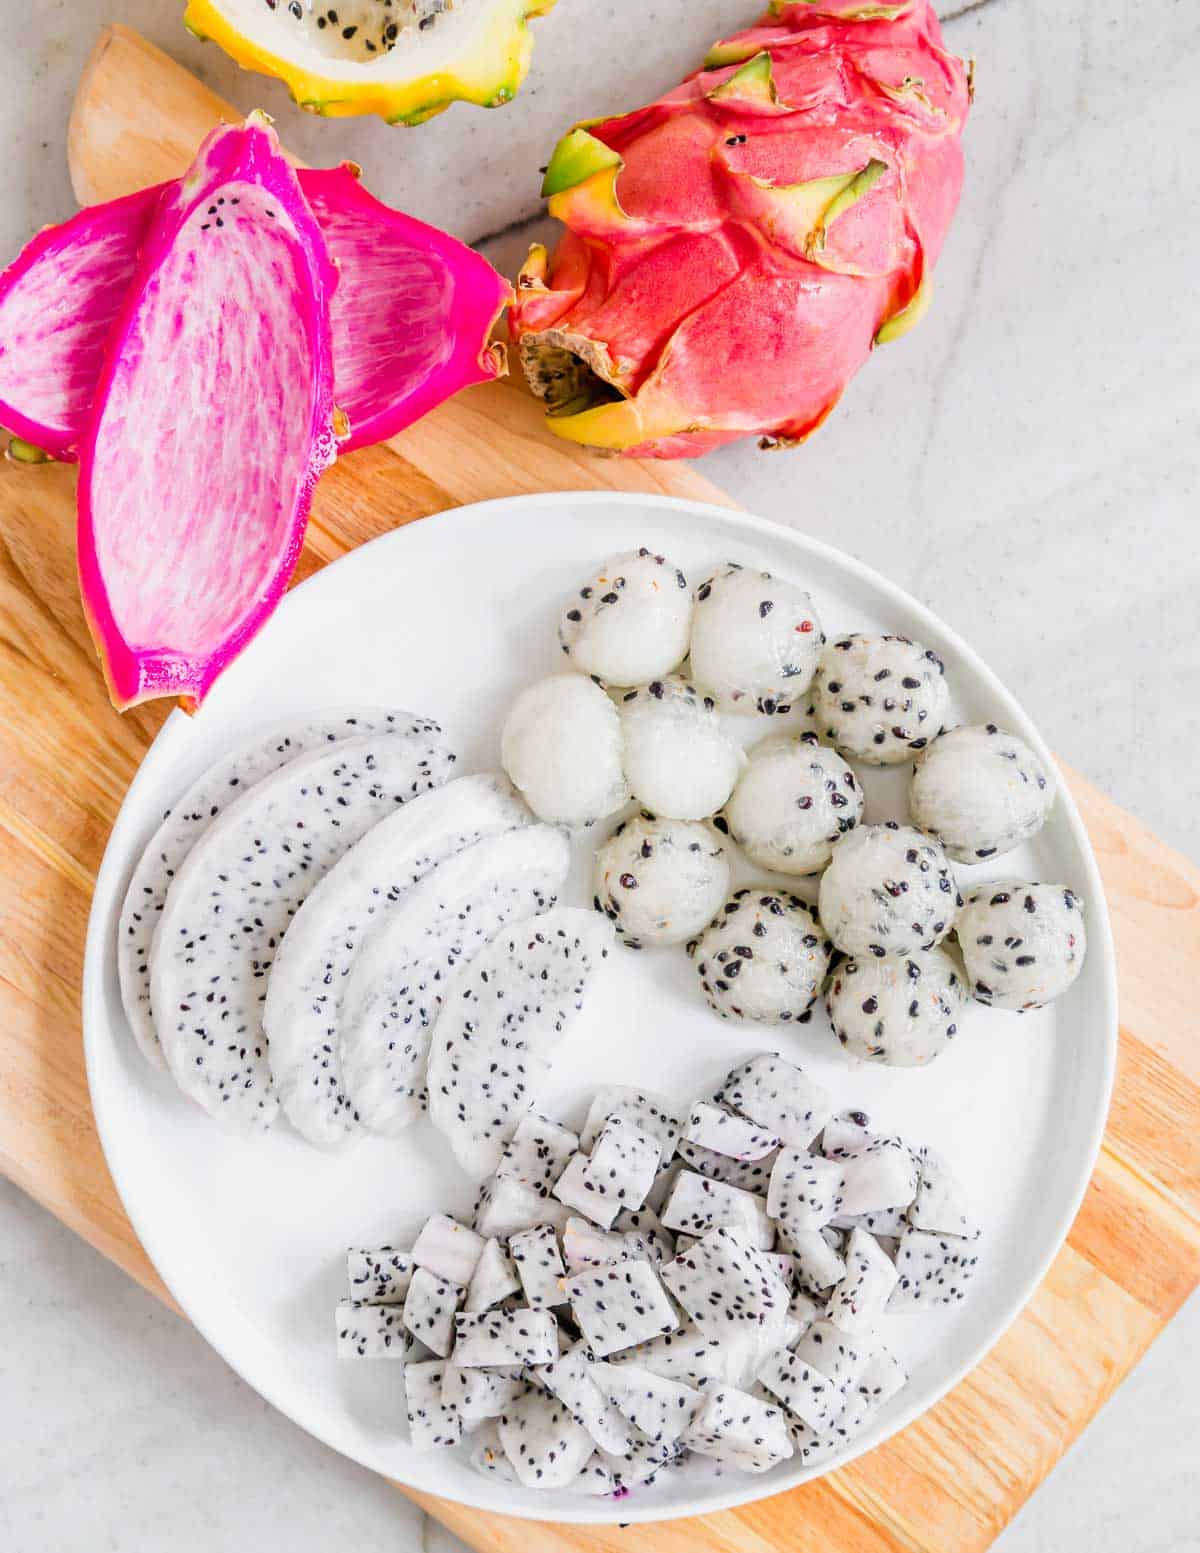 Dragonfruit cut into slices, balls and cubes on a plate.